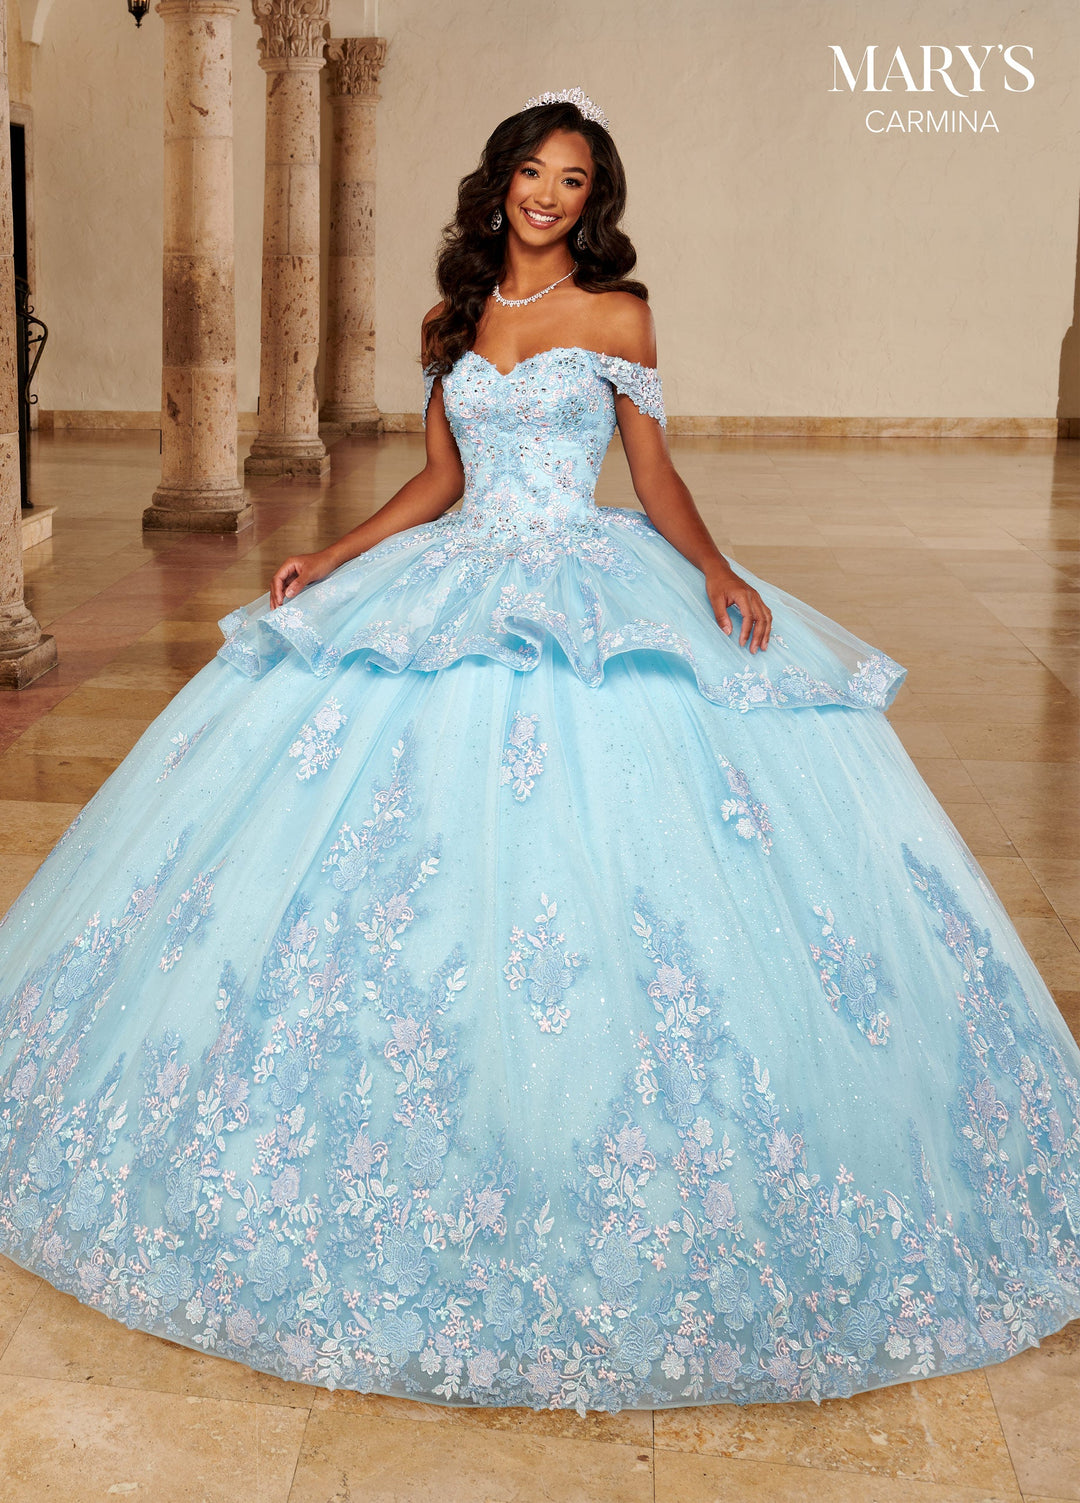 Applique Quinceanera Dress by Mary's Bridal MQ1098